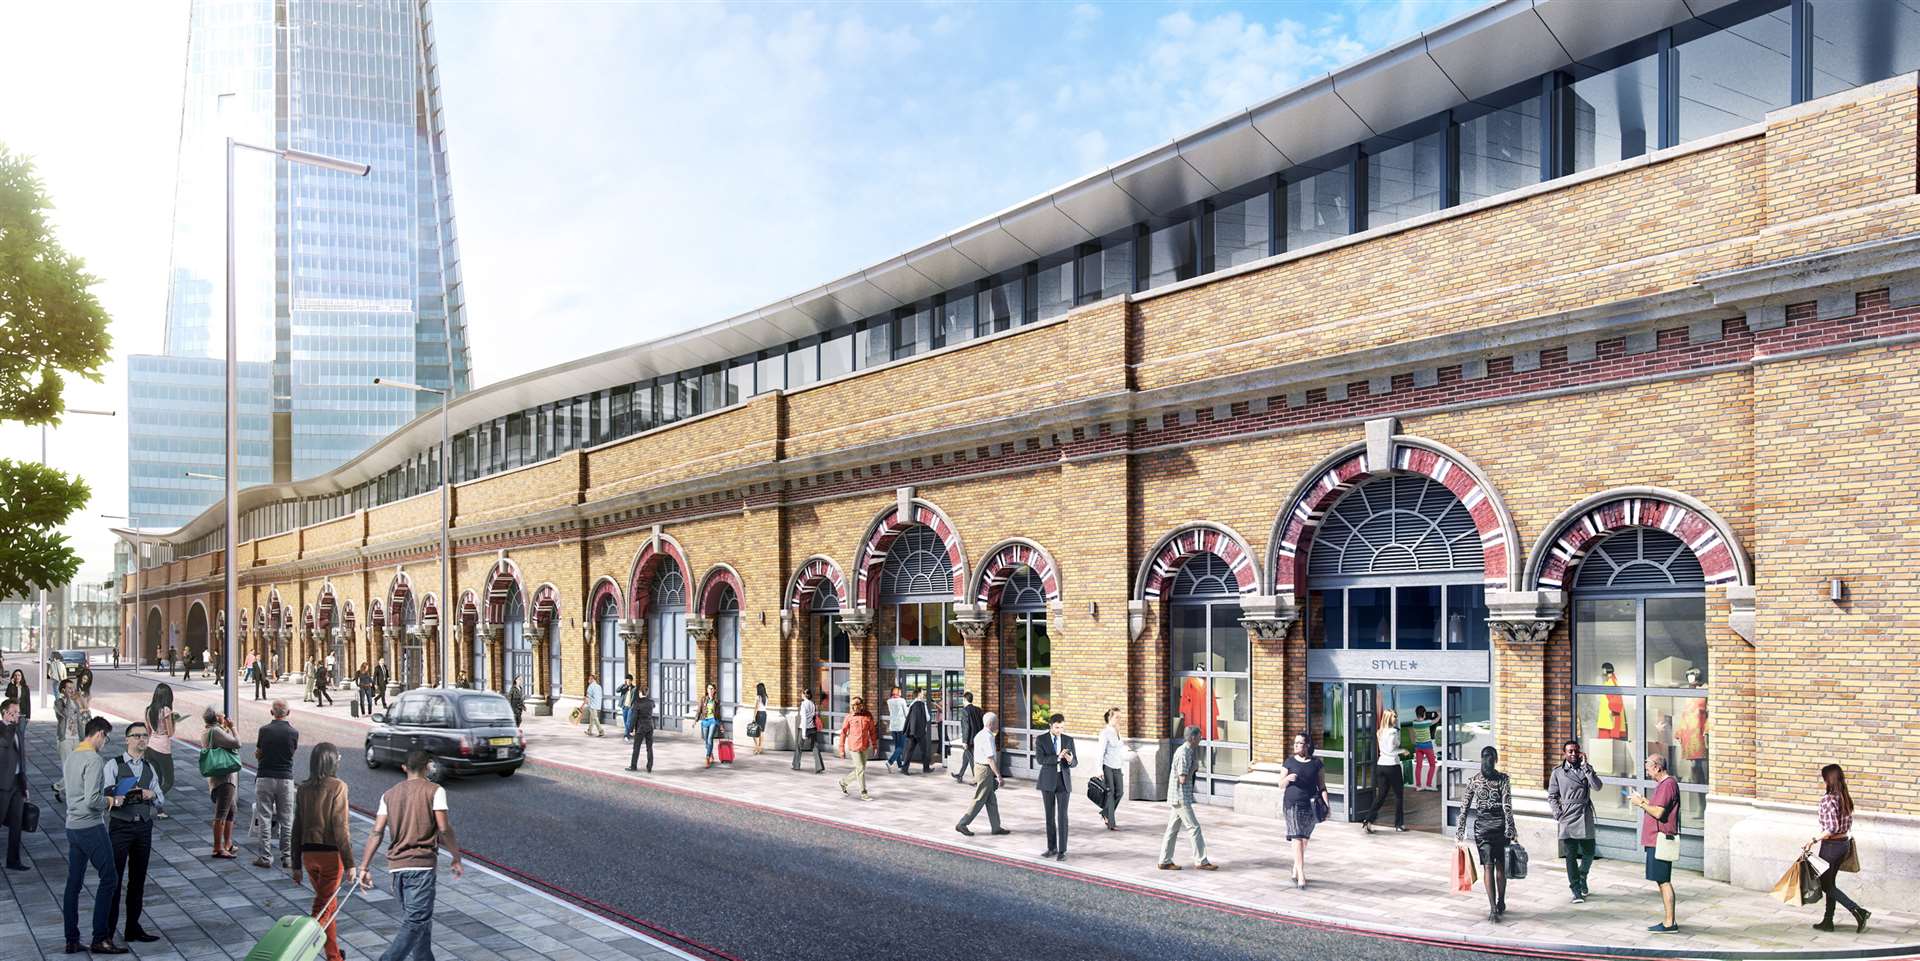 London Bridge will have rows of shops when its redevelopment is complete in 2018